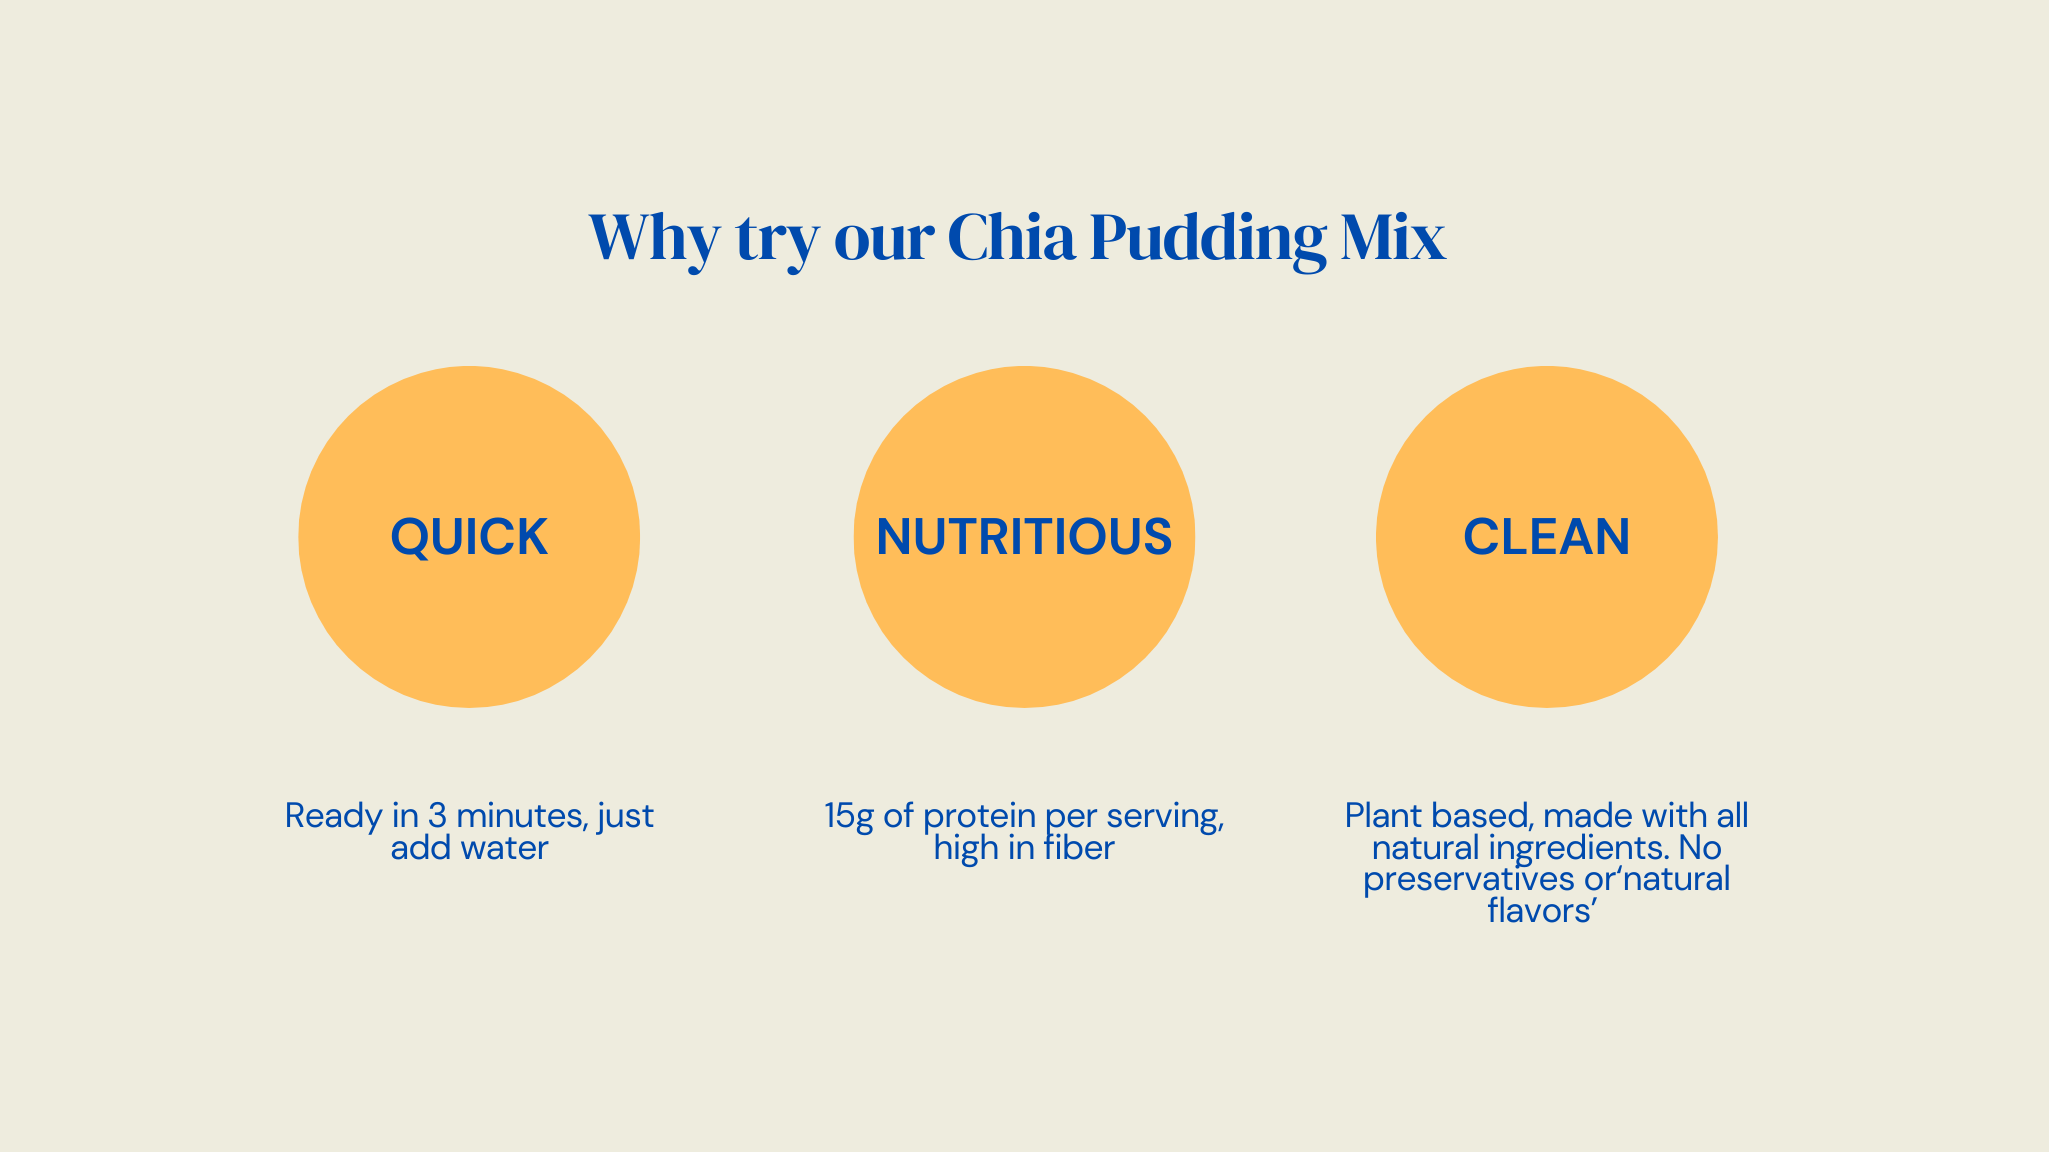 Try our chia pudding mix, it’s quick, nutritious and has wholesome ingredients